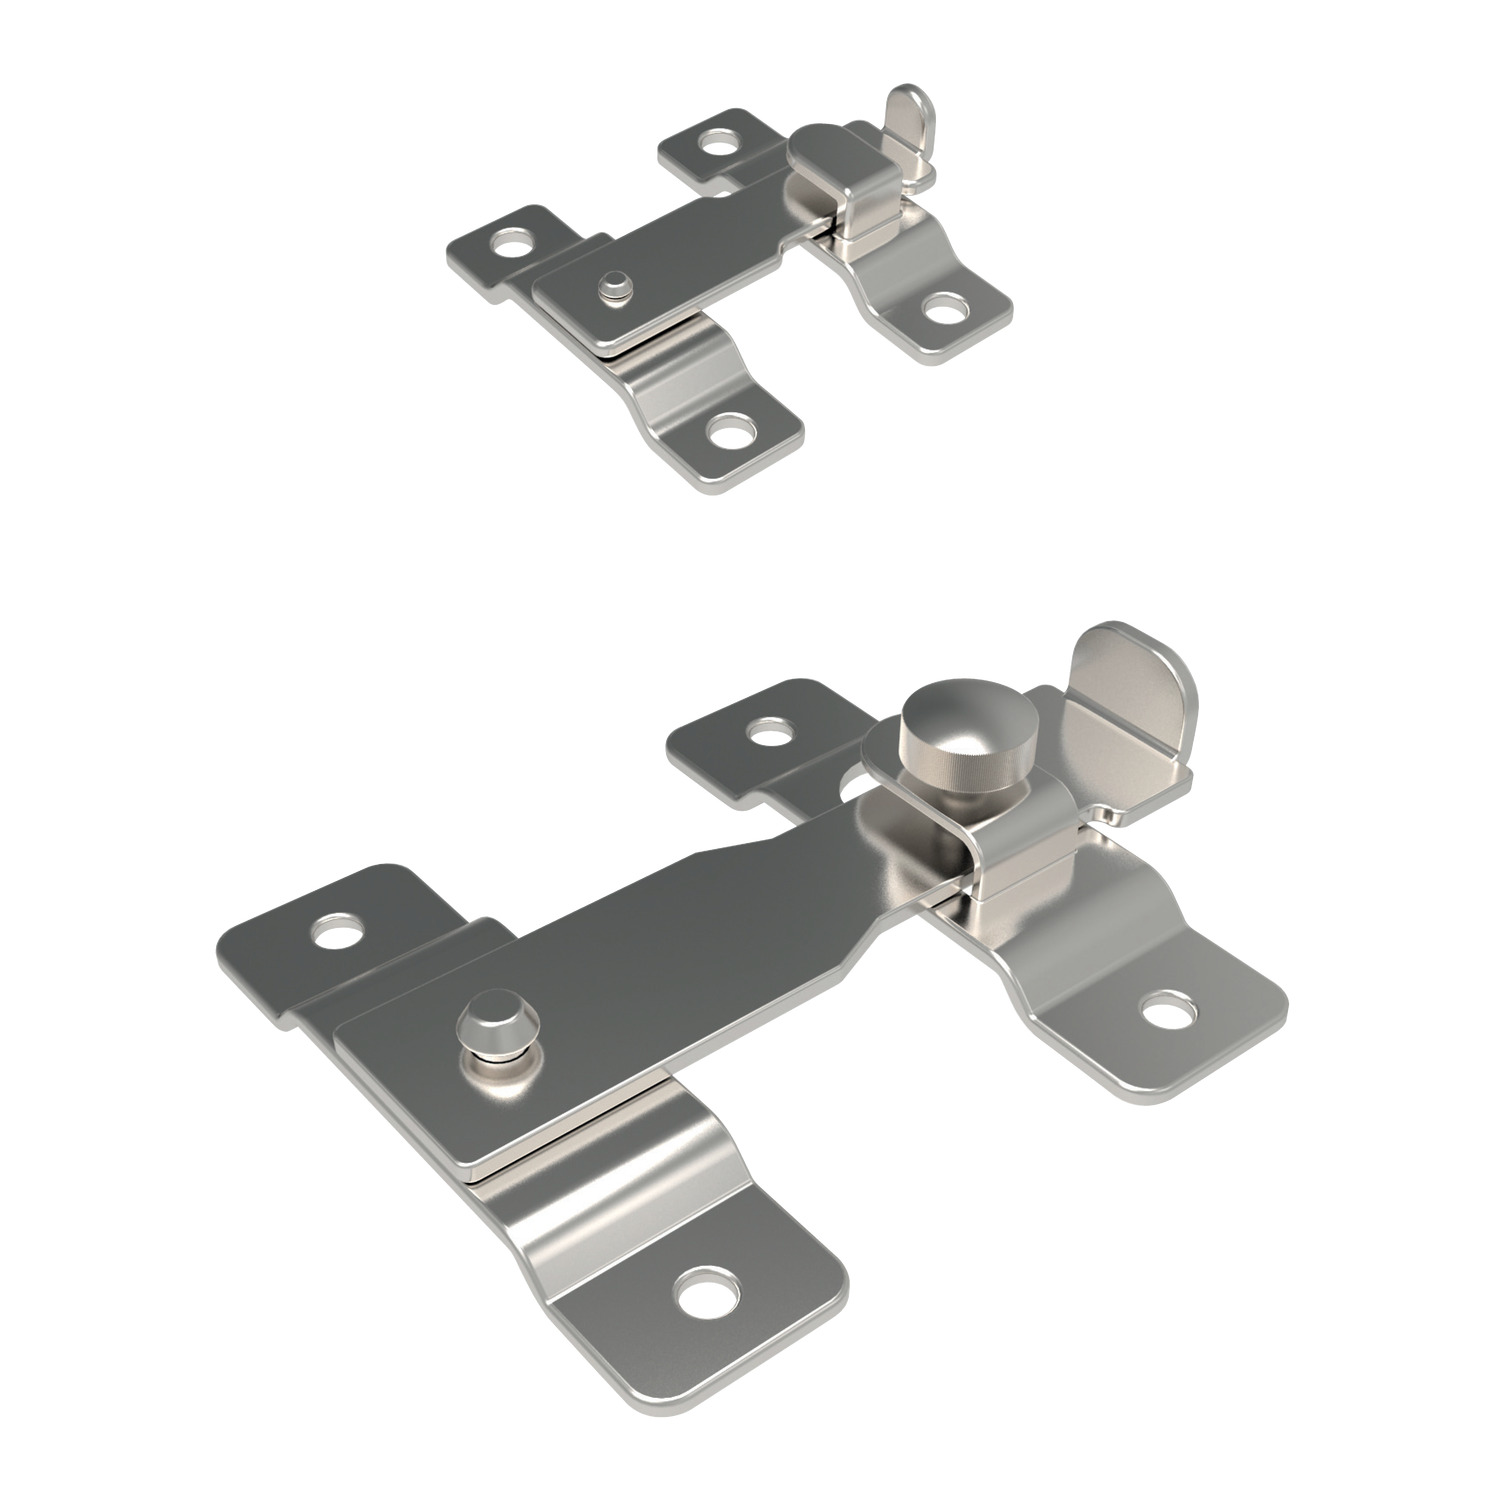 J6220.AC0100 Bar Latches Stainless Steel With thumb screw. 100 x 80